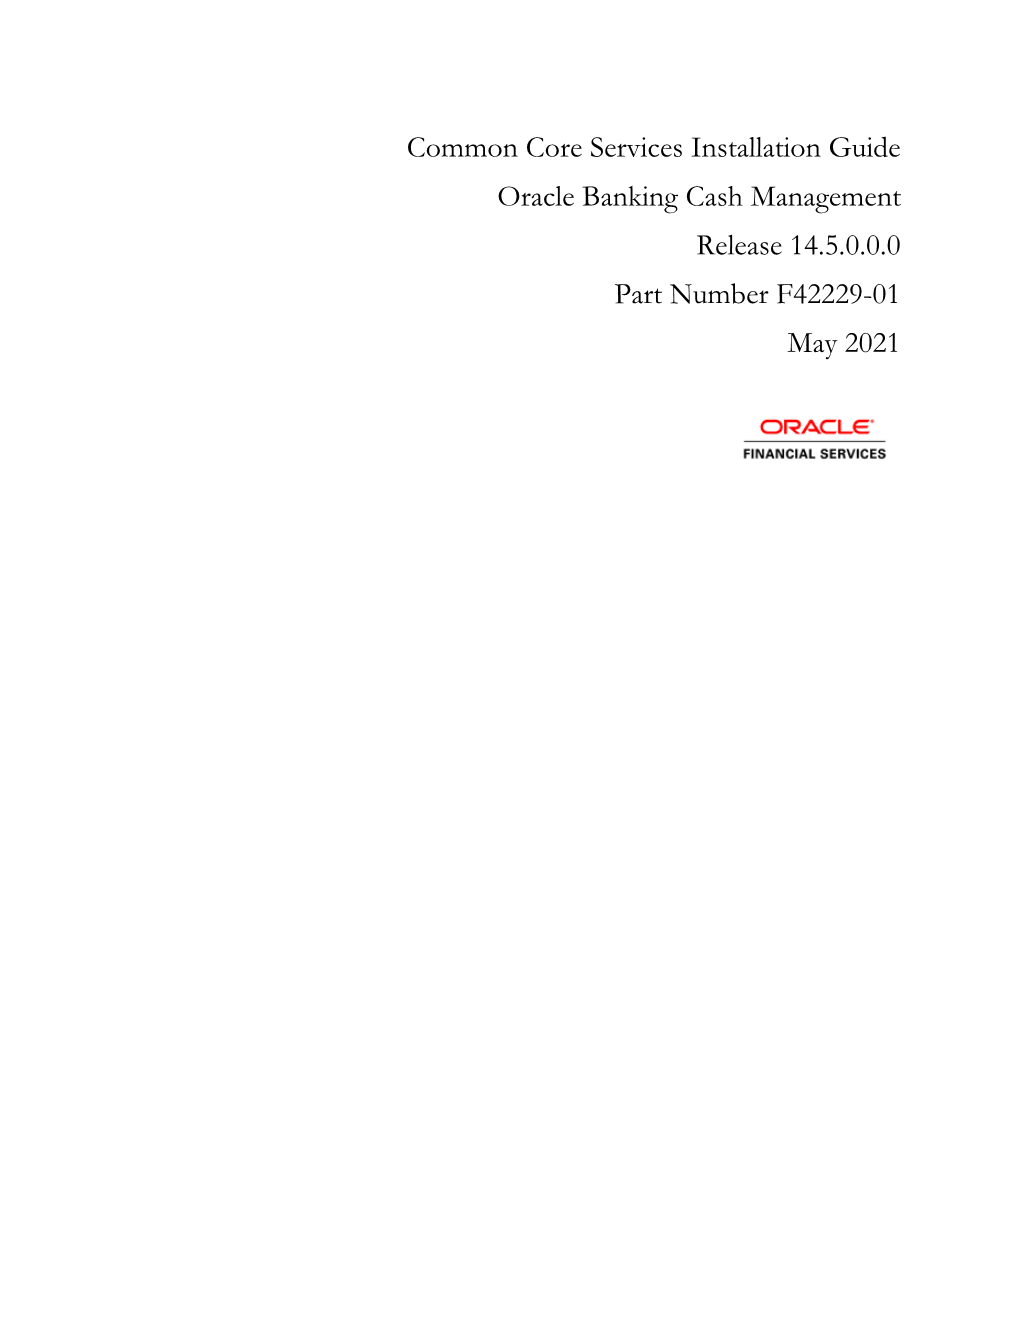 Common Core Services Installation Guide Oracle Banking Cash Management Release 14.5.0.0.0 Part Number F42229-01 May 2021